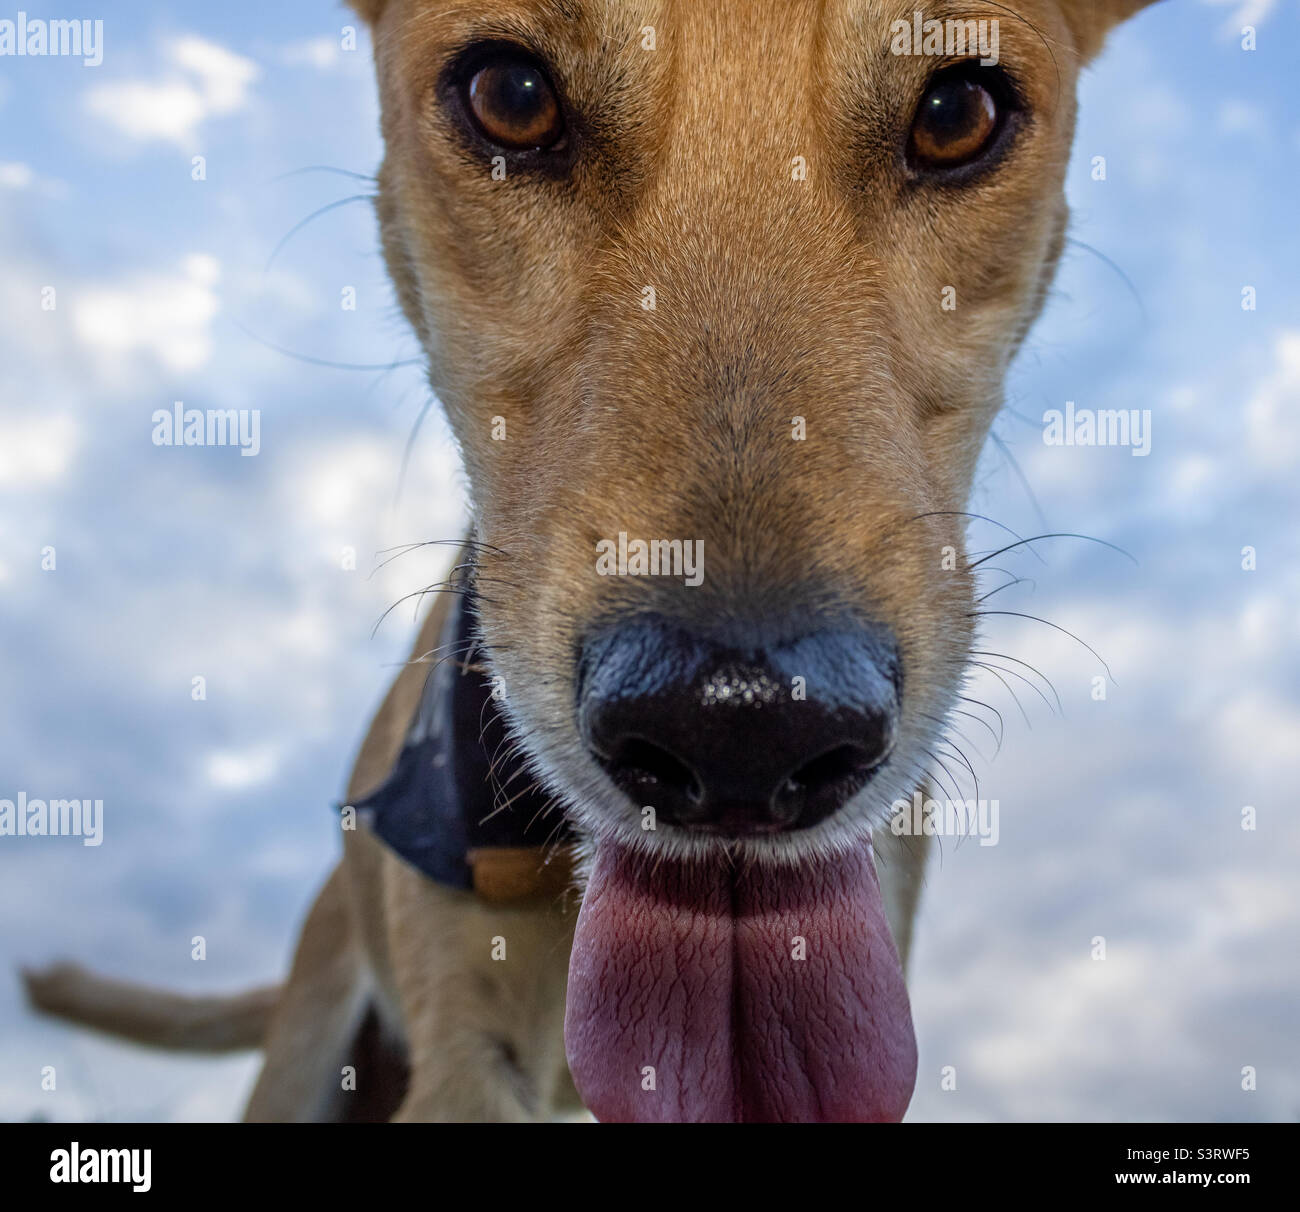 Dog looks at the camera from above, with sky behind him Stock Photo